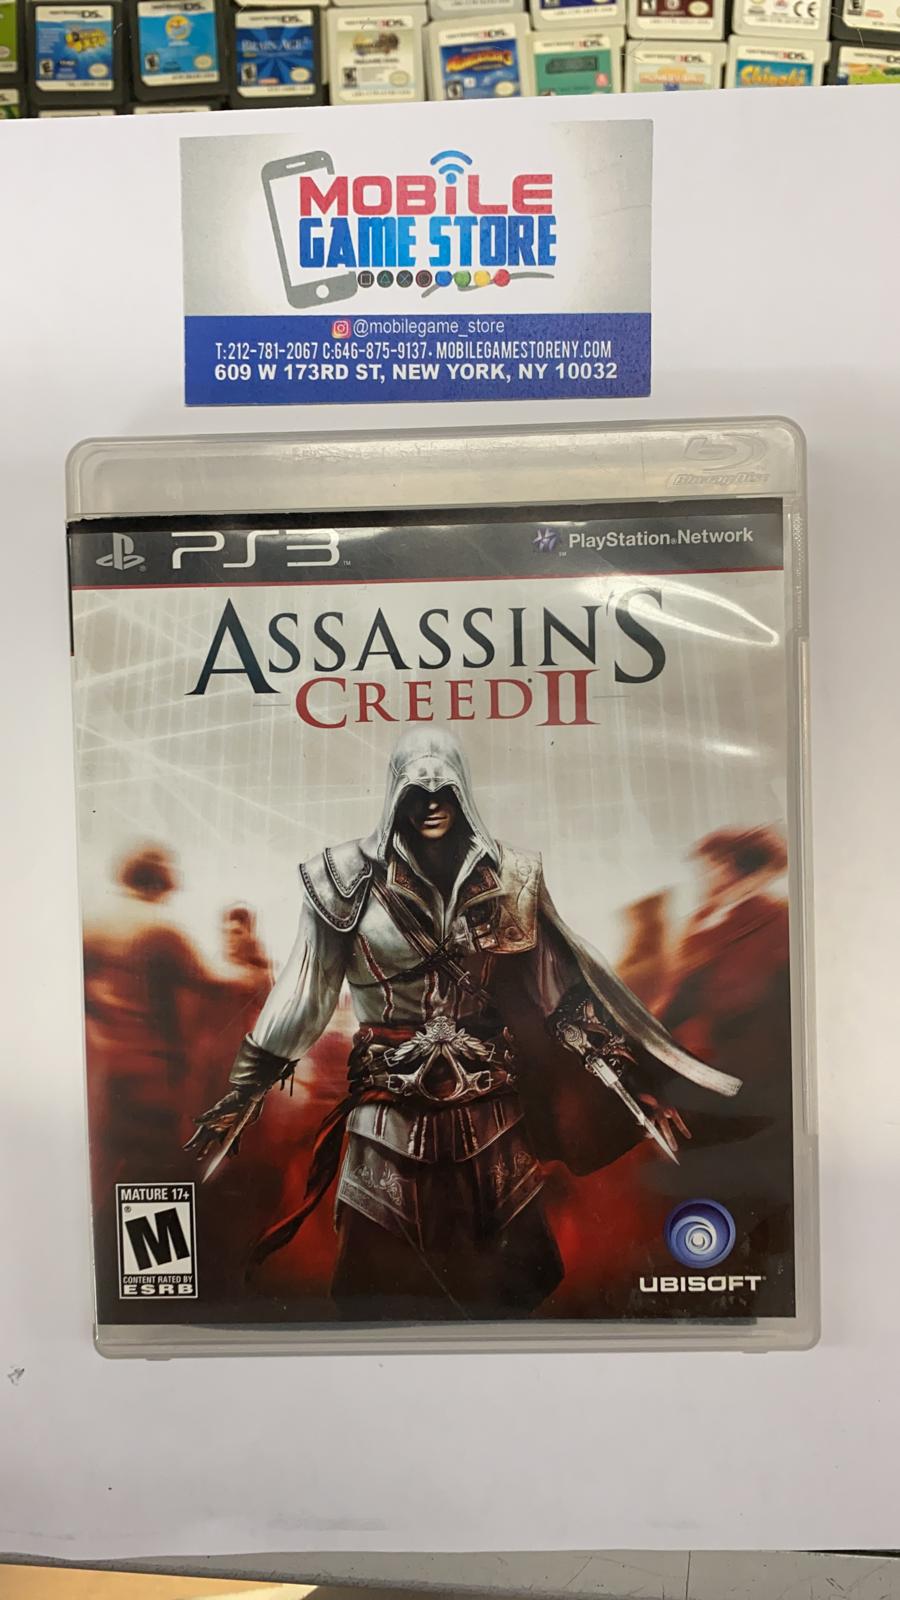 Assassin's Creed II (pre-owned)